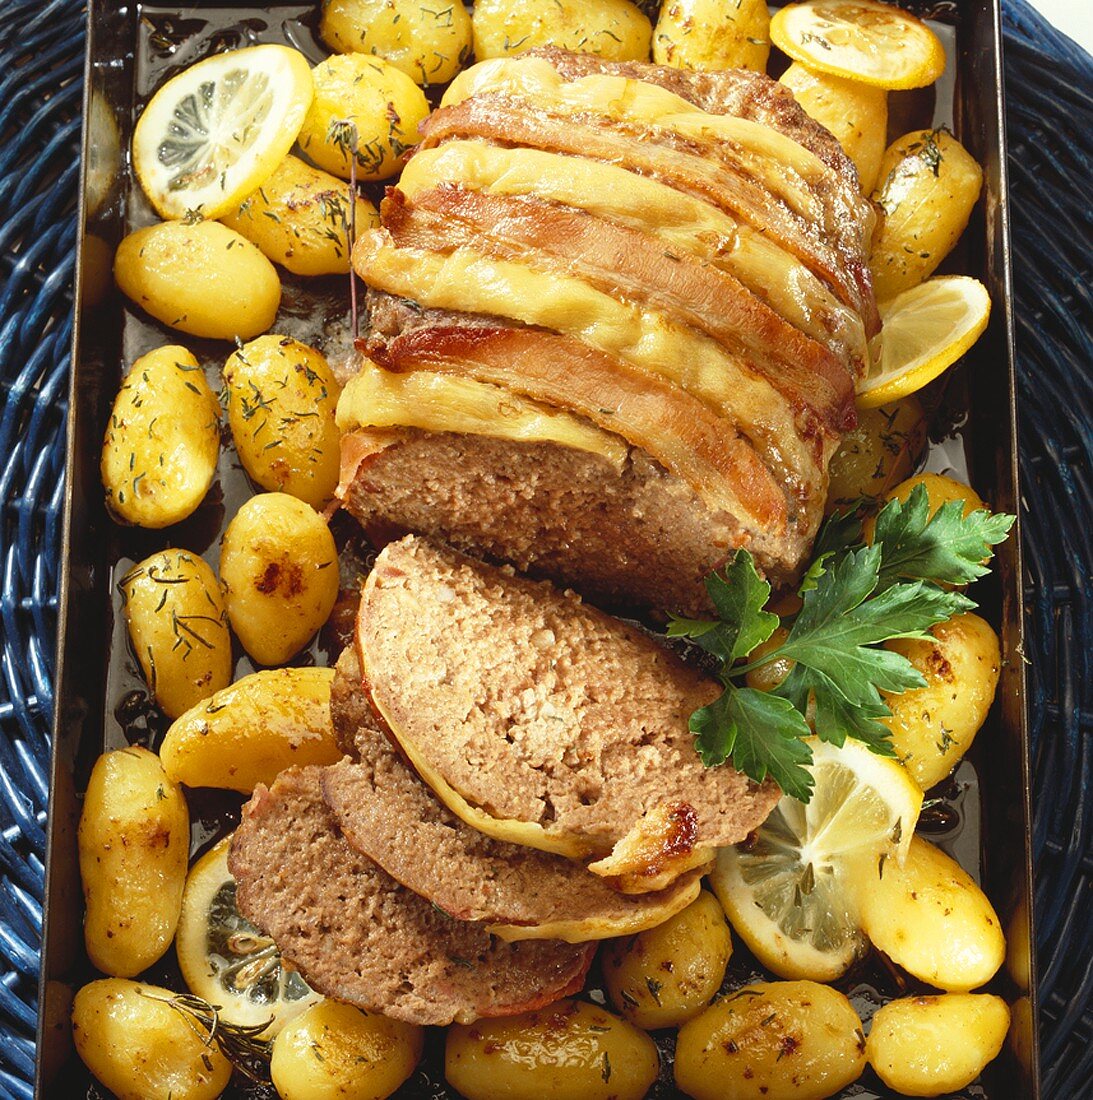 Bacon-wrapped meatloaf with potatoes on a baking tray